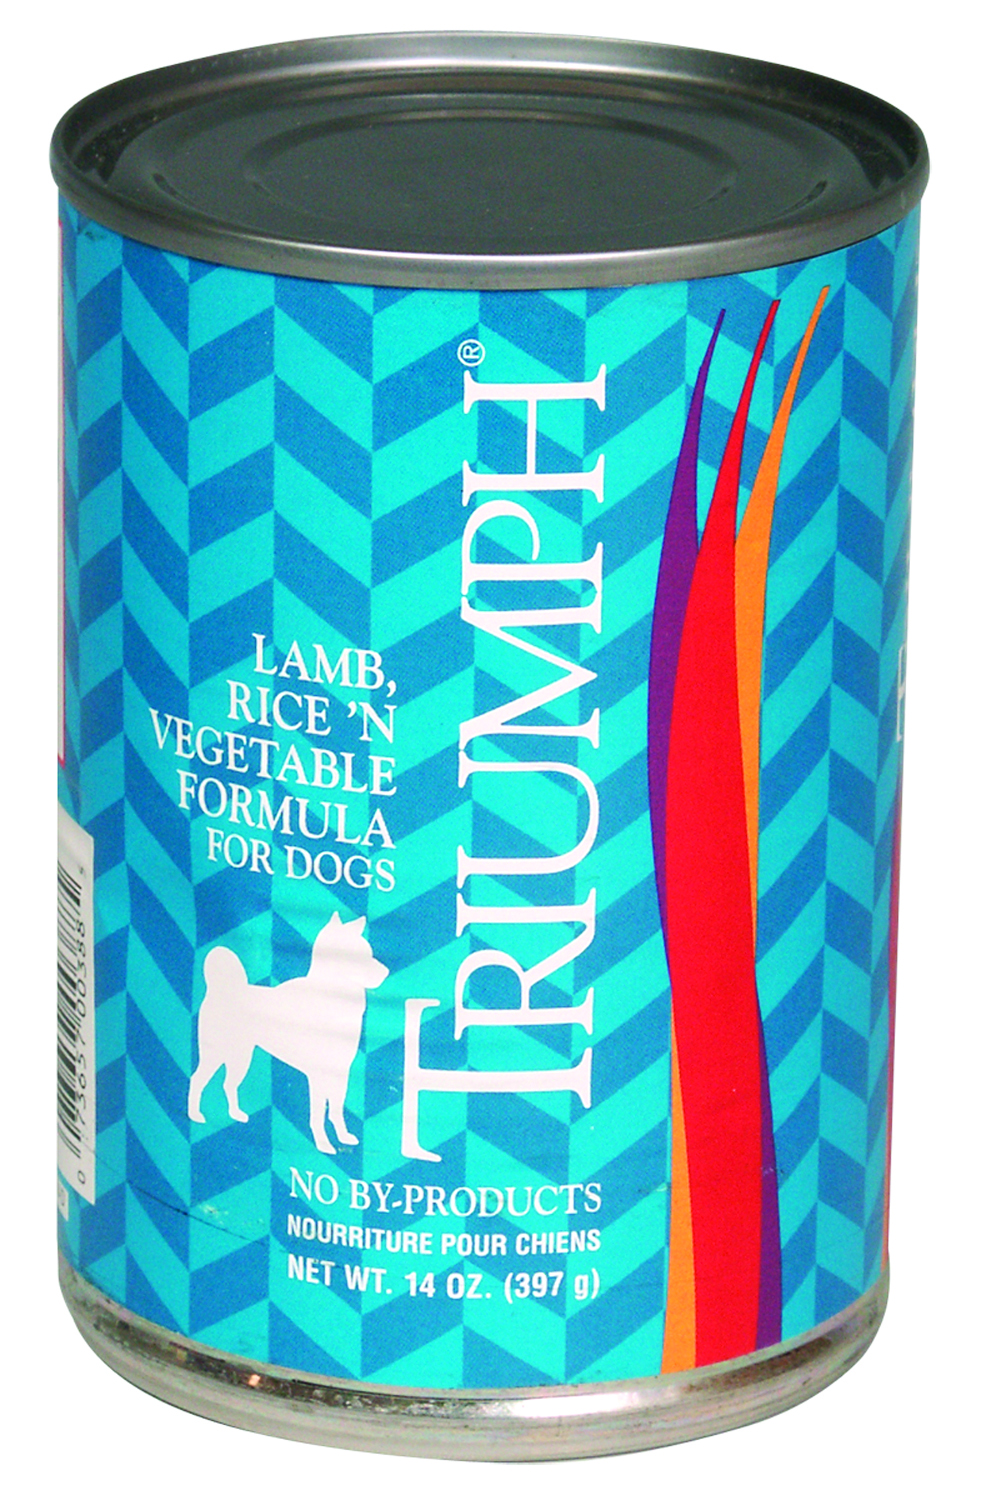 14 Oz Triumph Canned Dog Food - Lamb/Rice Vegetable